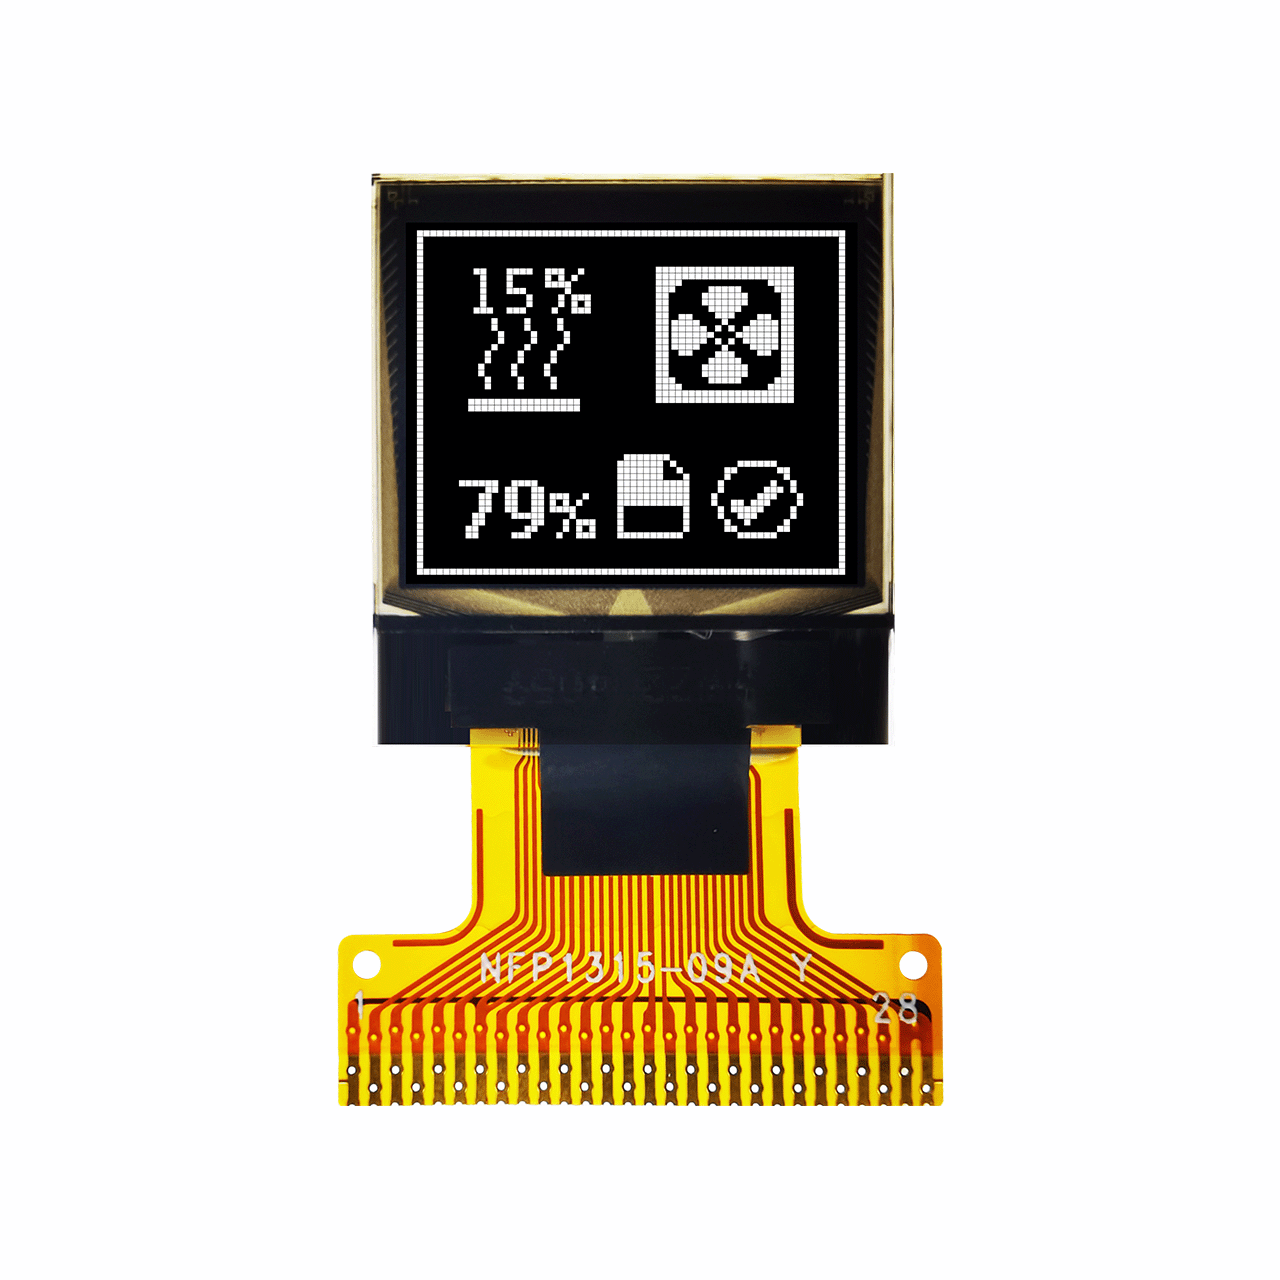 0.66 inch 64x48 White Graphic OLED MONO DISPLAY SSD1315